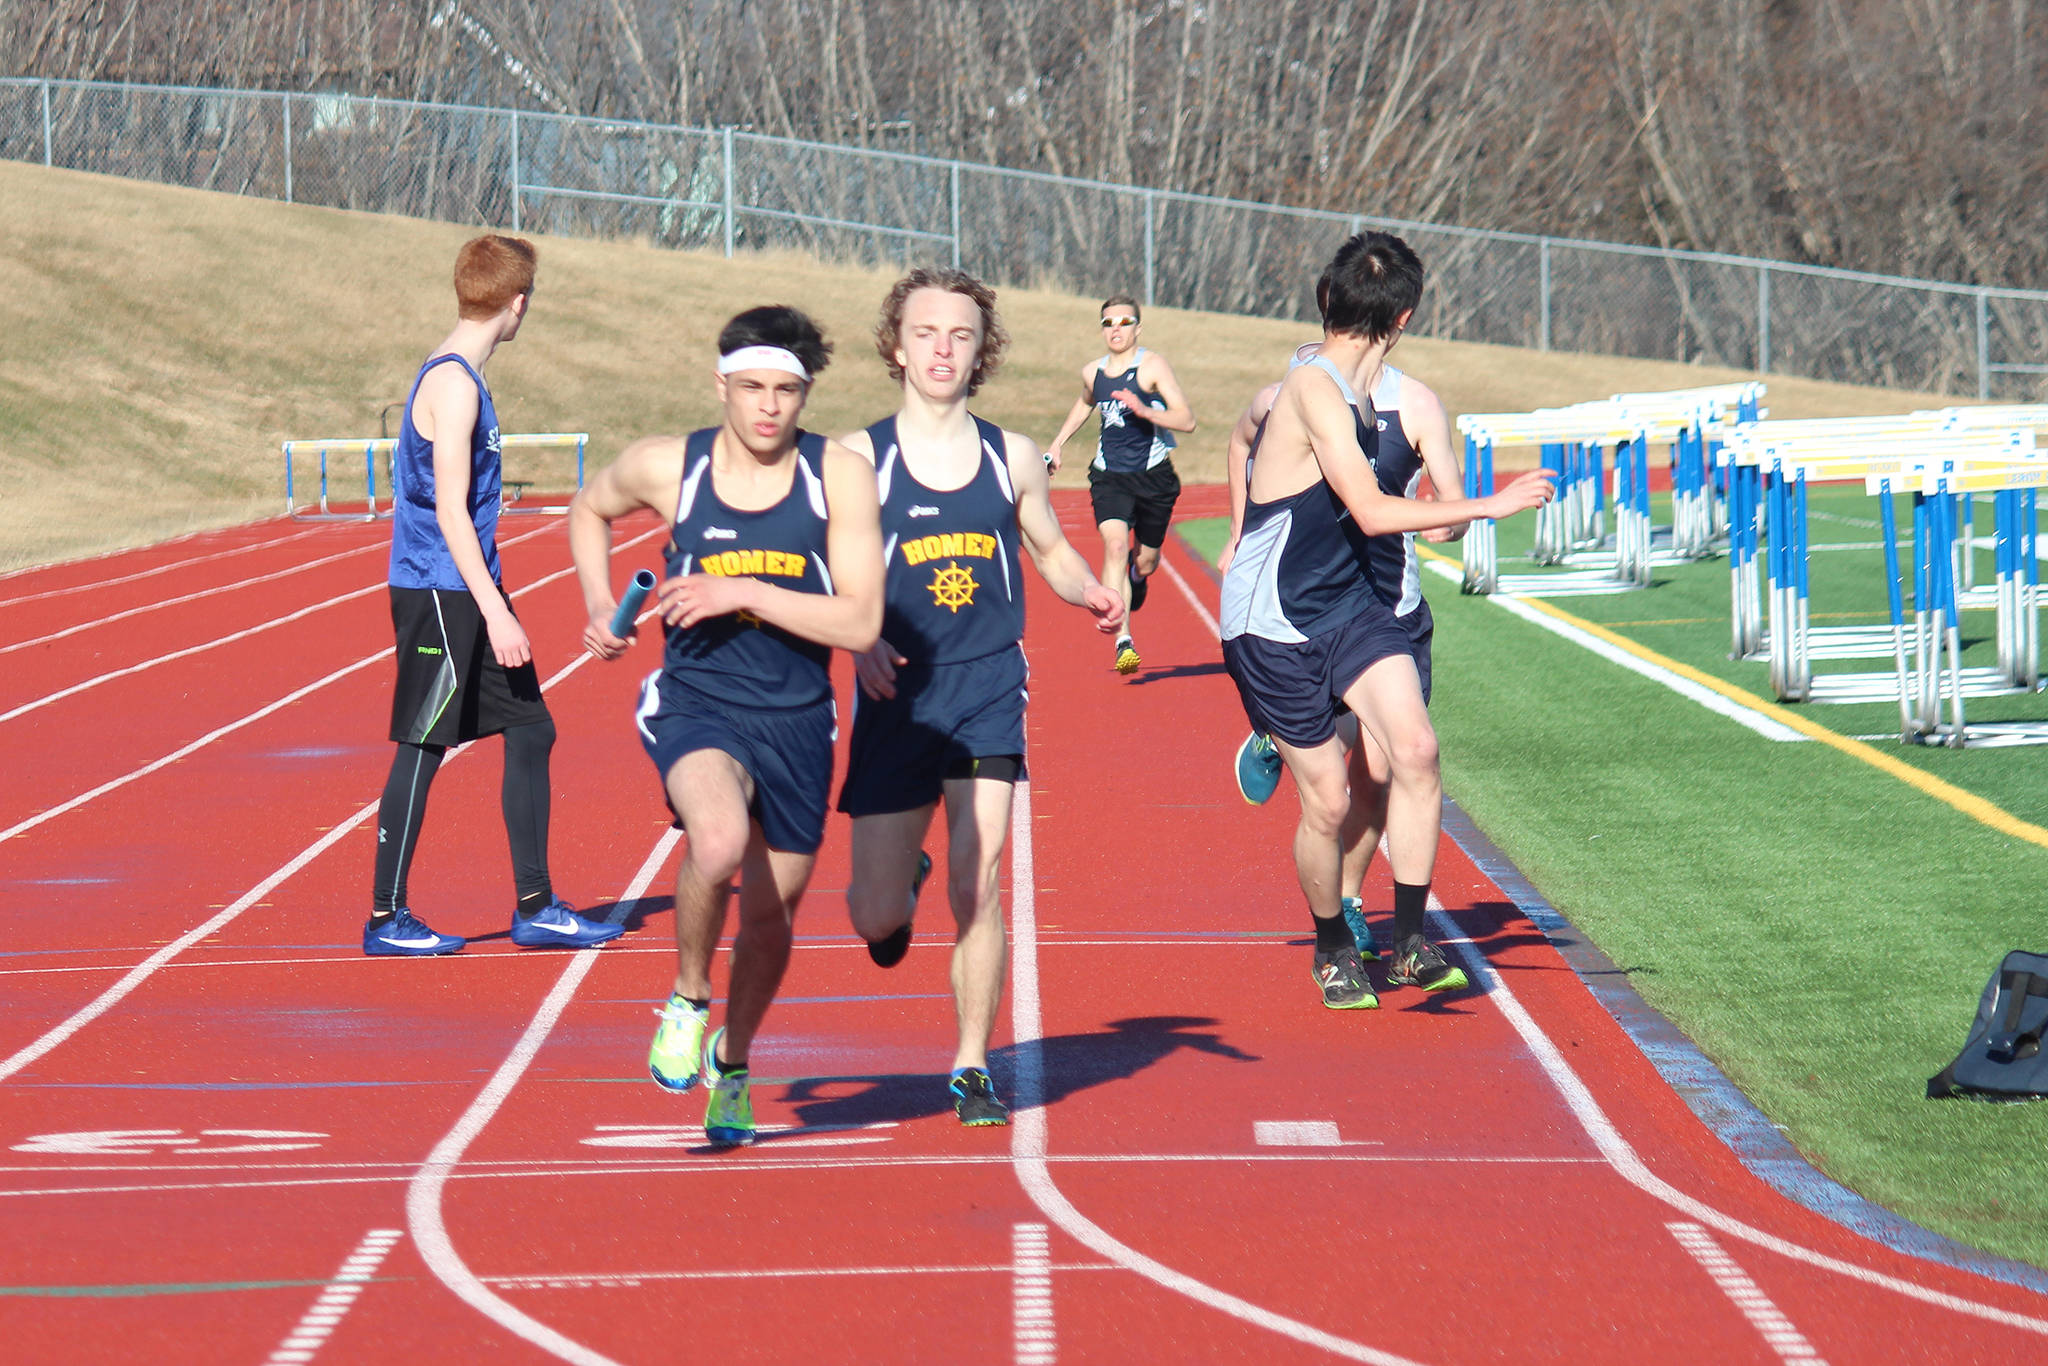 Homer’s Luciano Fasulo takes a handoff from senior Jacob Davis during the boys’ 1,600-meter relay Friday, April 13, 2018 at Homer High School in Homer, Alaska. (Photo by Megan Pacer/Homer News)